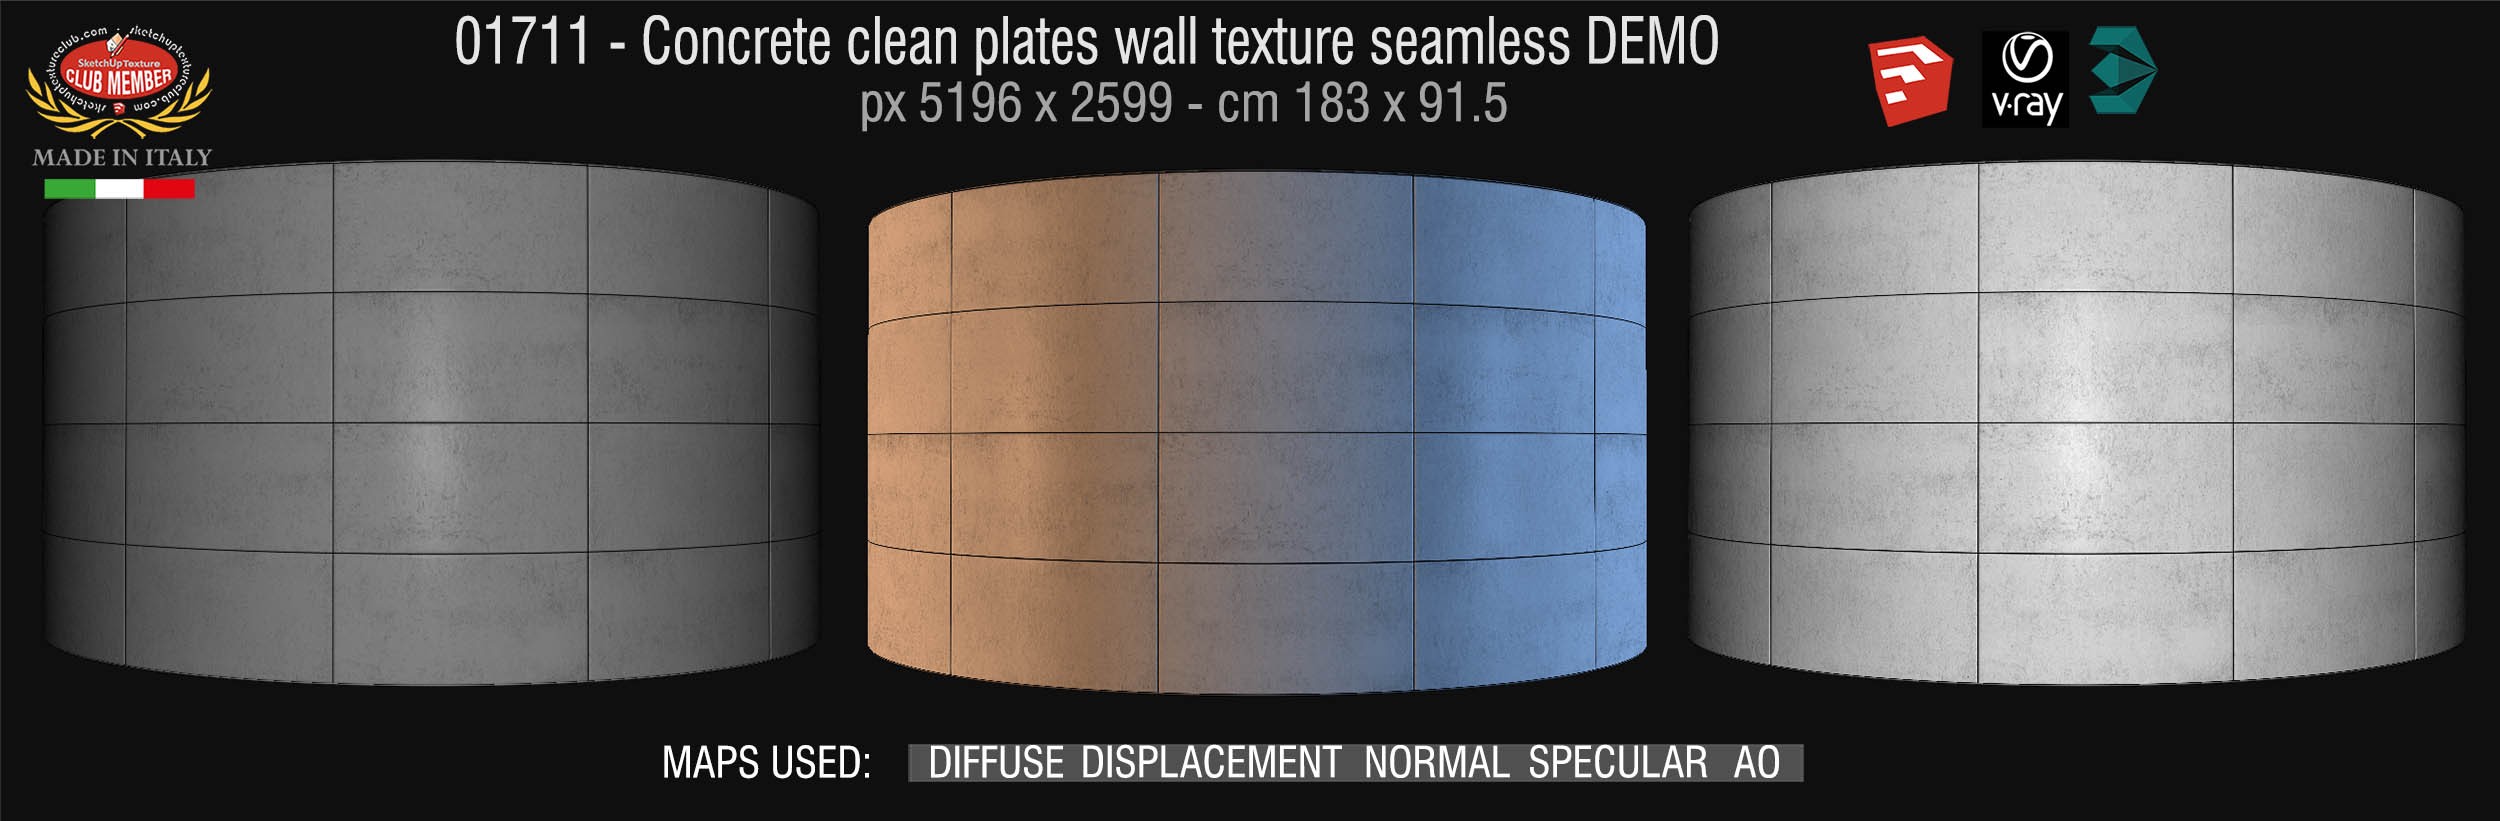 01711 Concrete clean plates wall texture seamless + maps DEMO